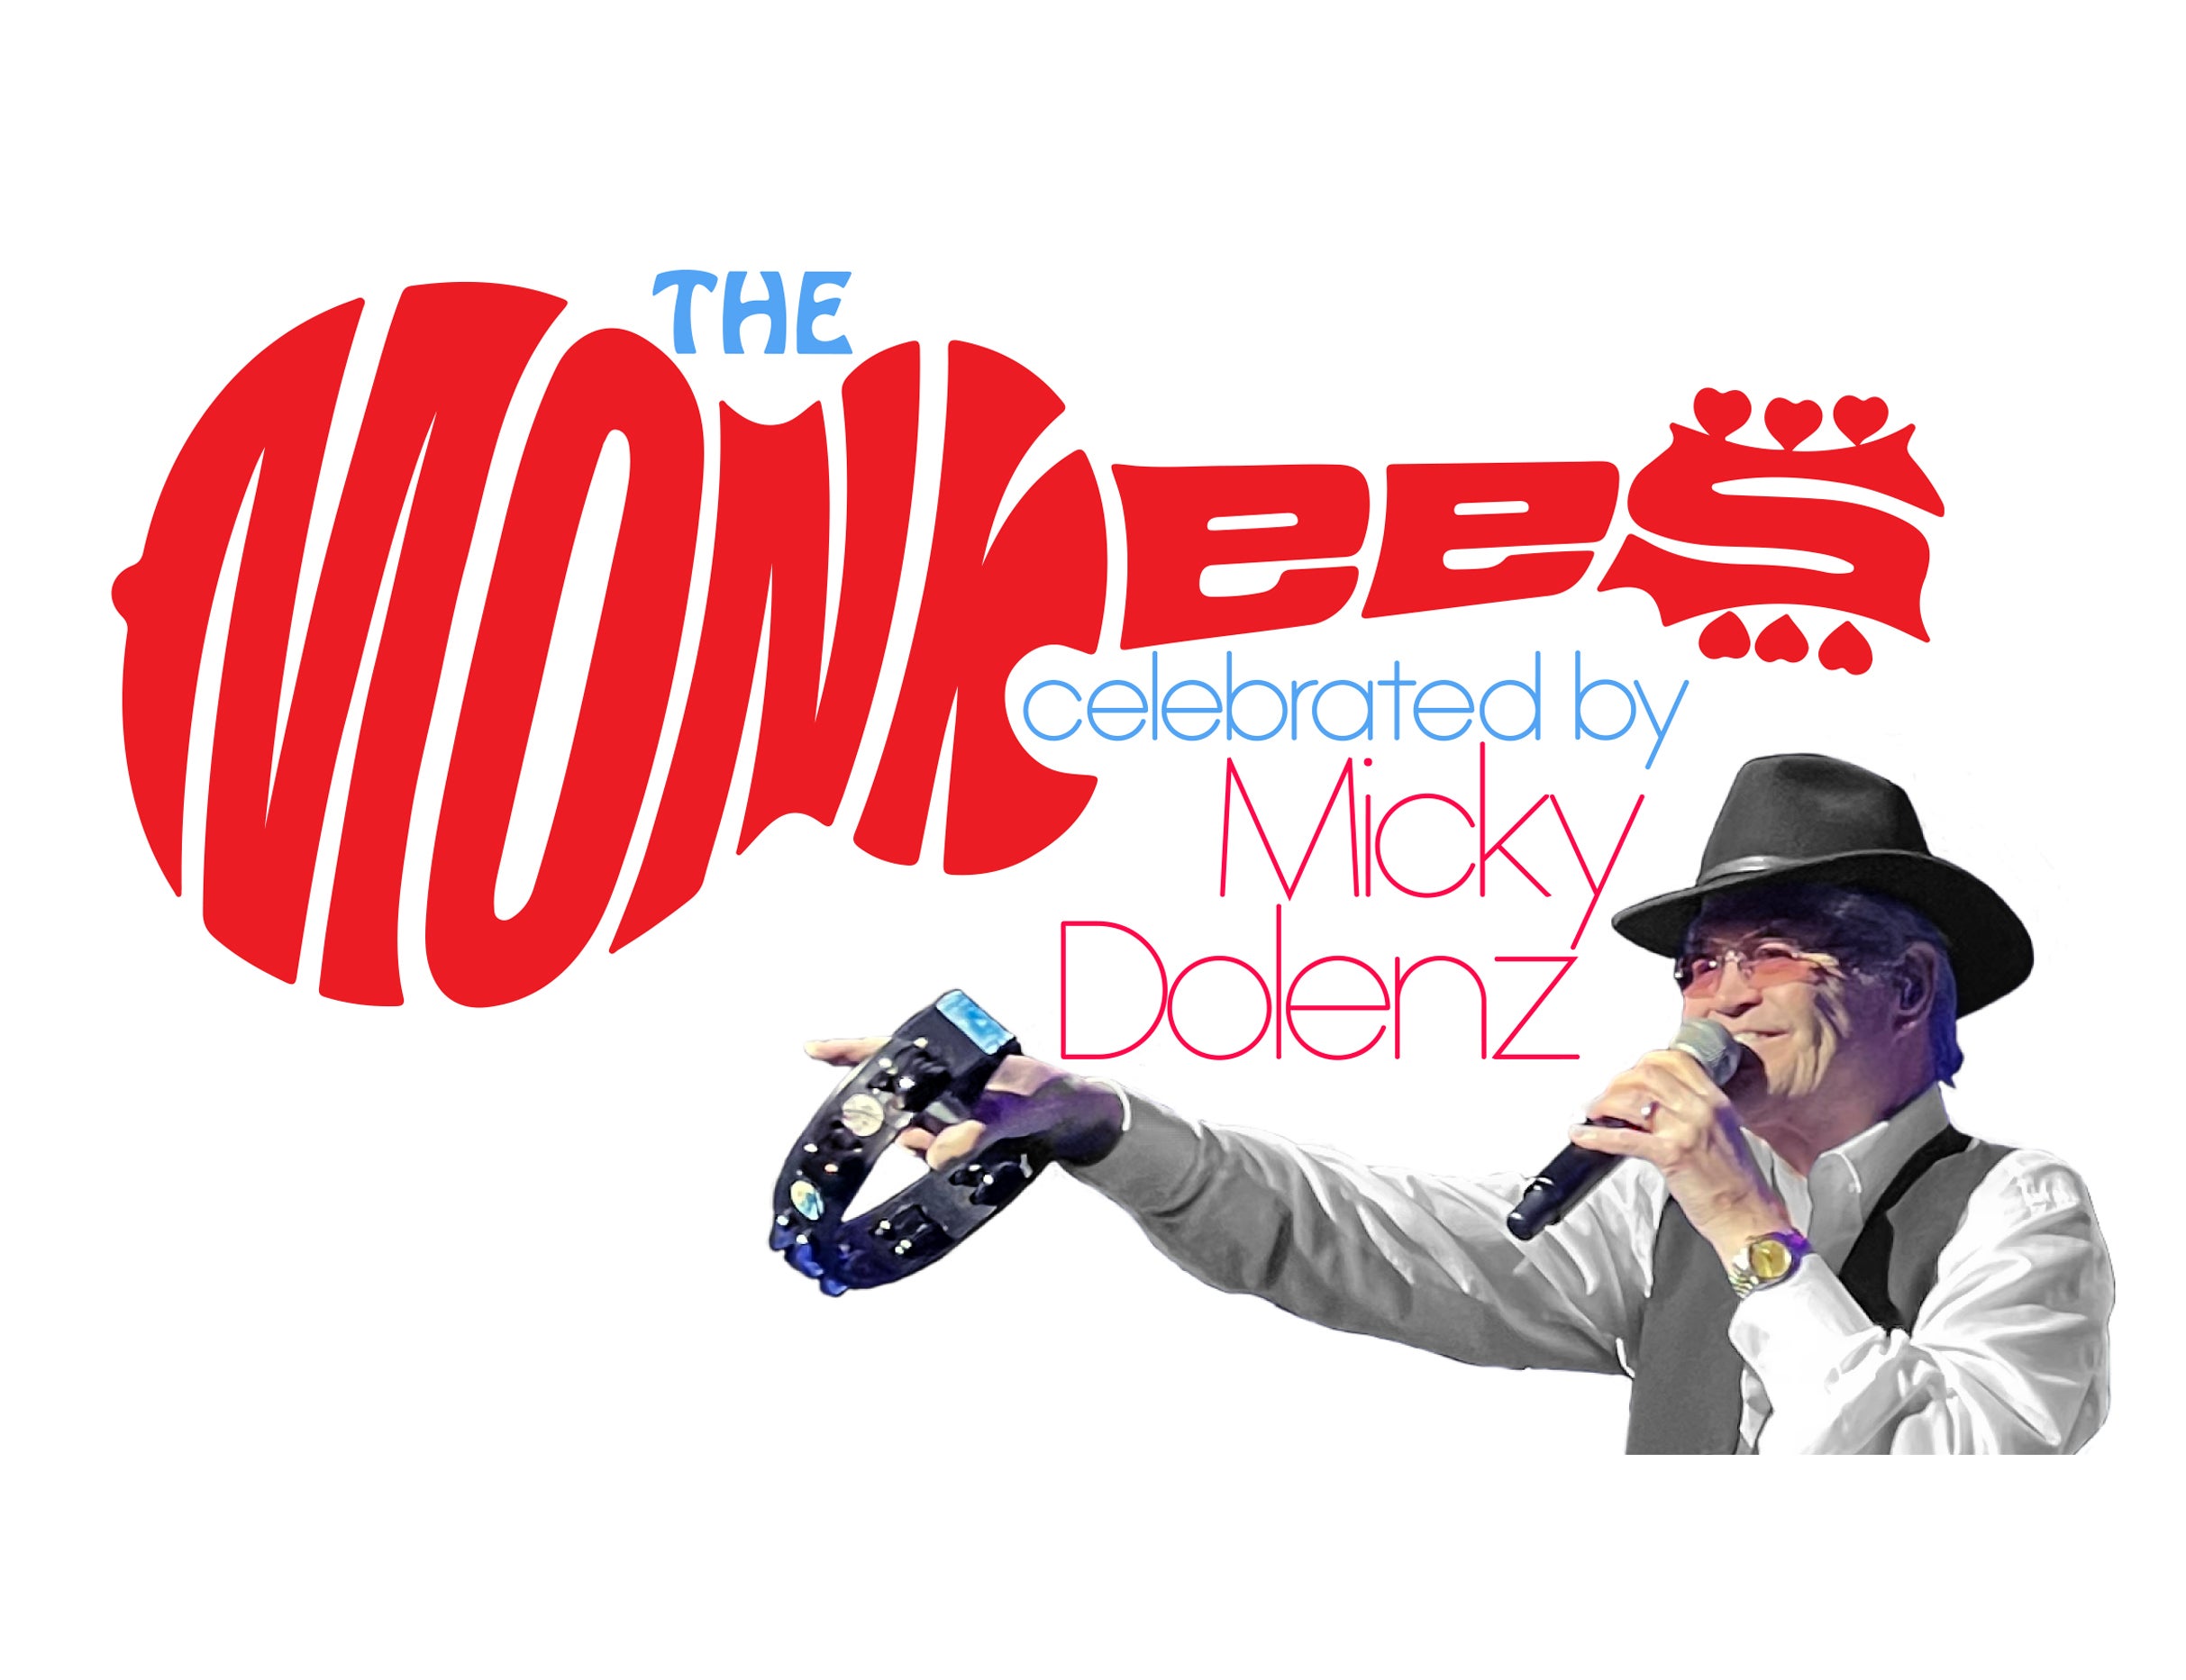 The Monkees Celebrated By Micky Dolenz in Temecula promo photo for Venue presale offer code